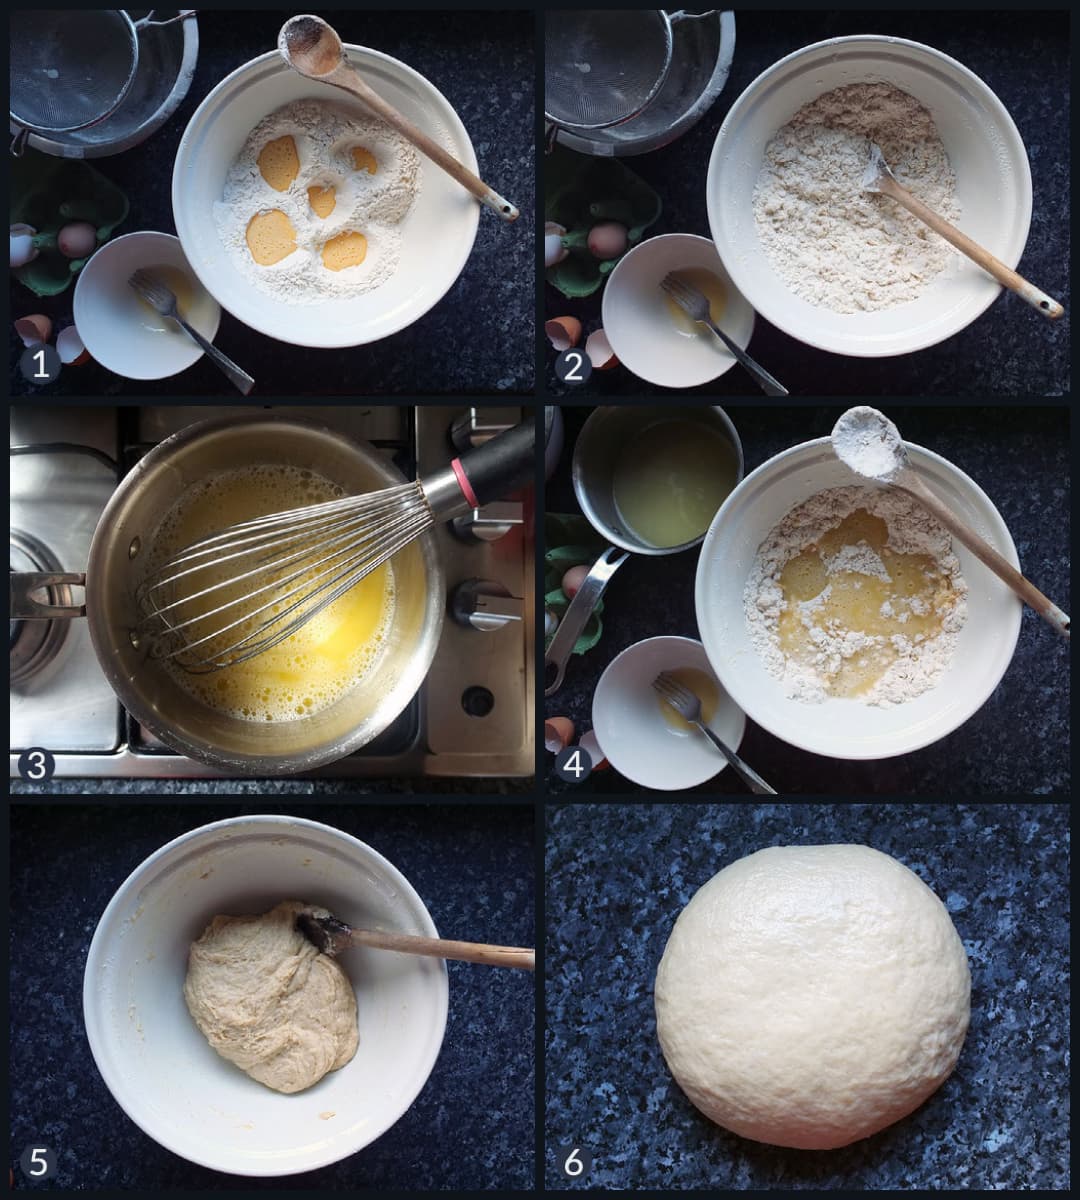 Step by step collage showing how to make hot water crust pastry from scratch.